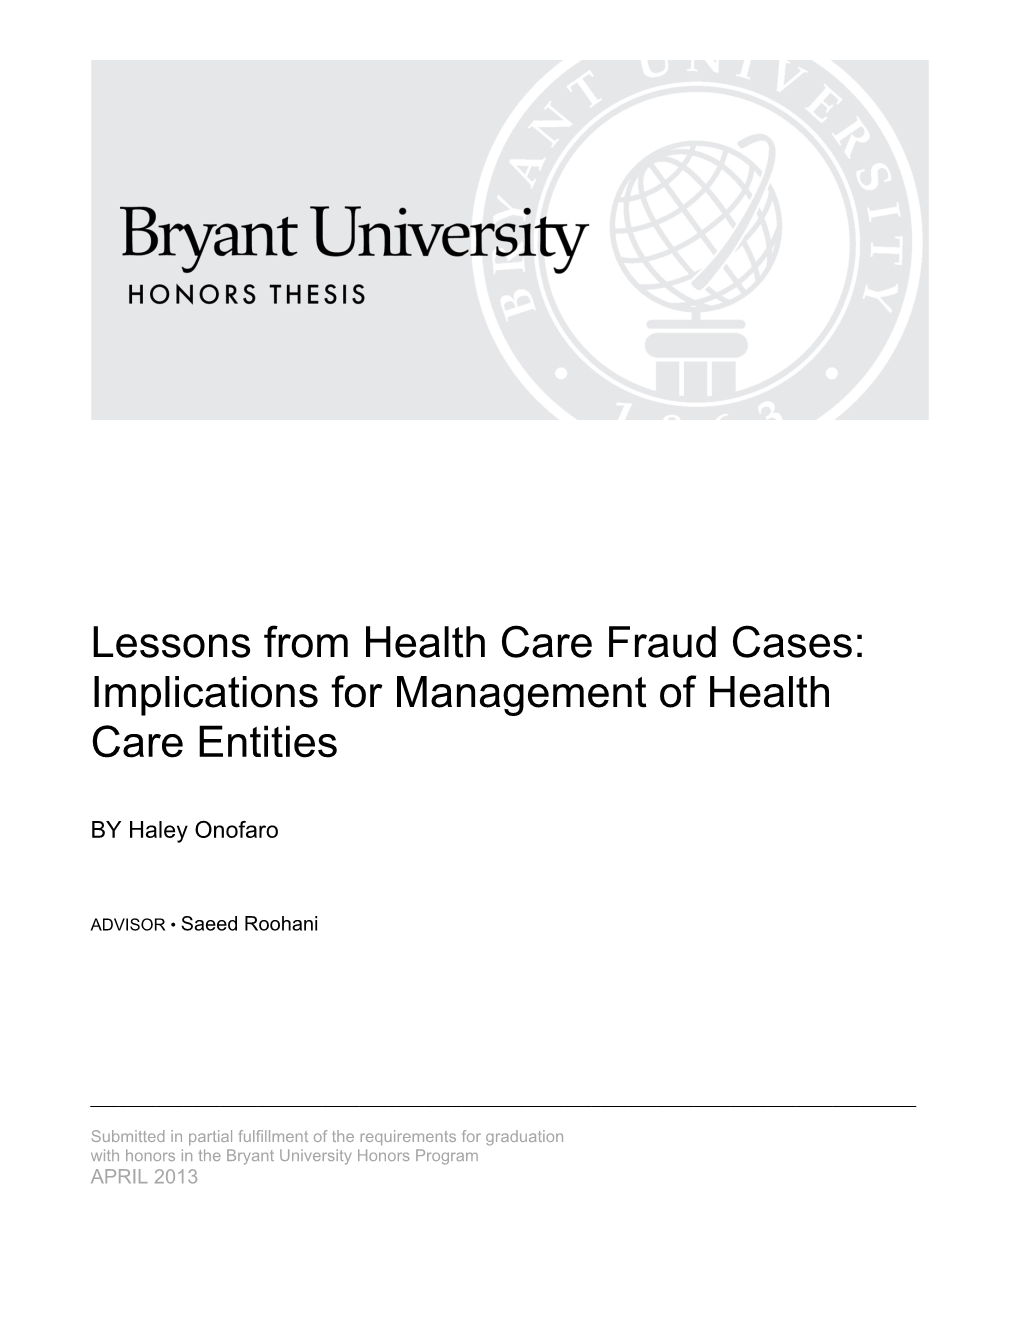 Lessons from Health Care Fraud Cases: Implications for Management of Health Care Entities